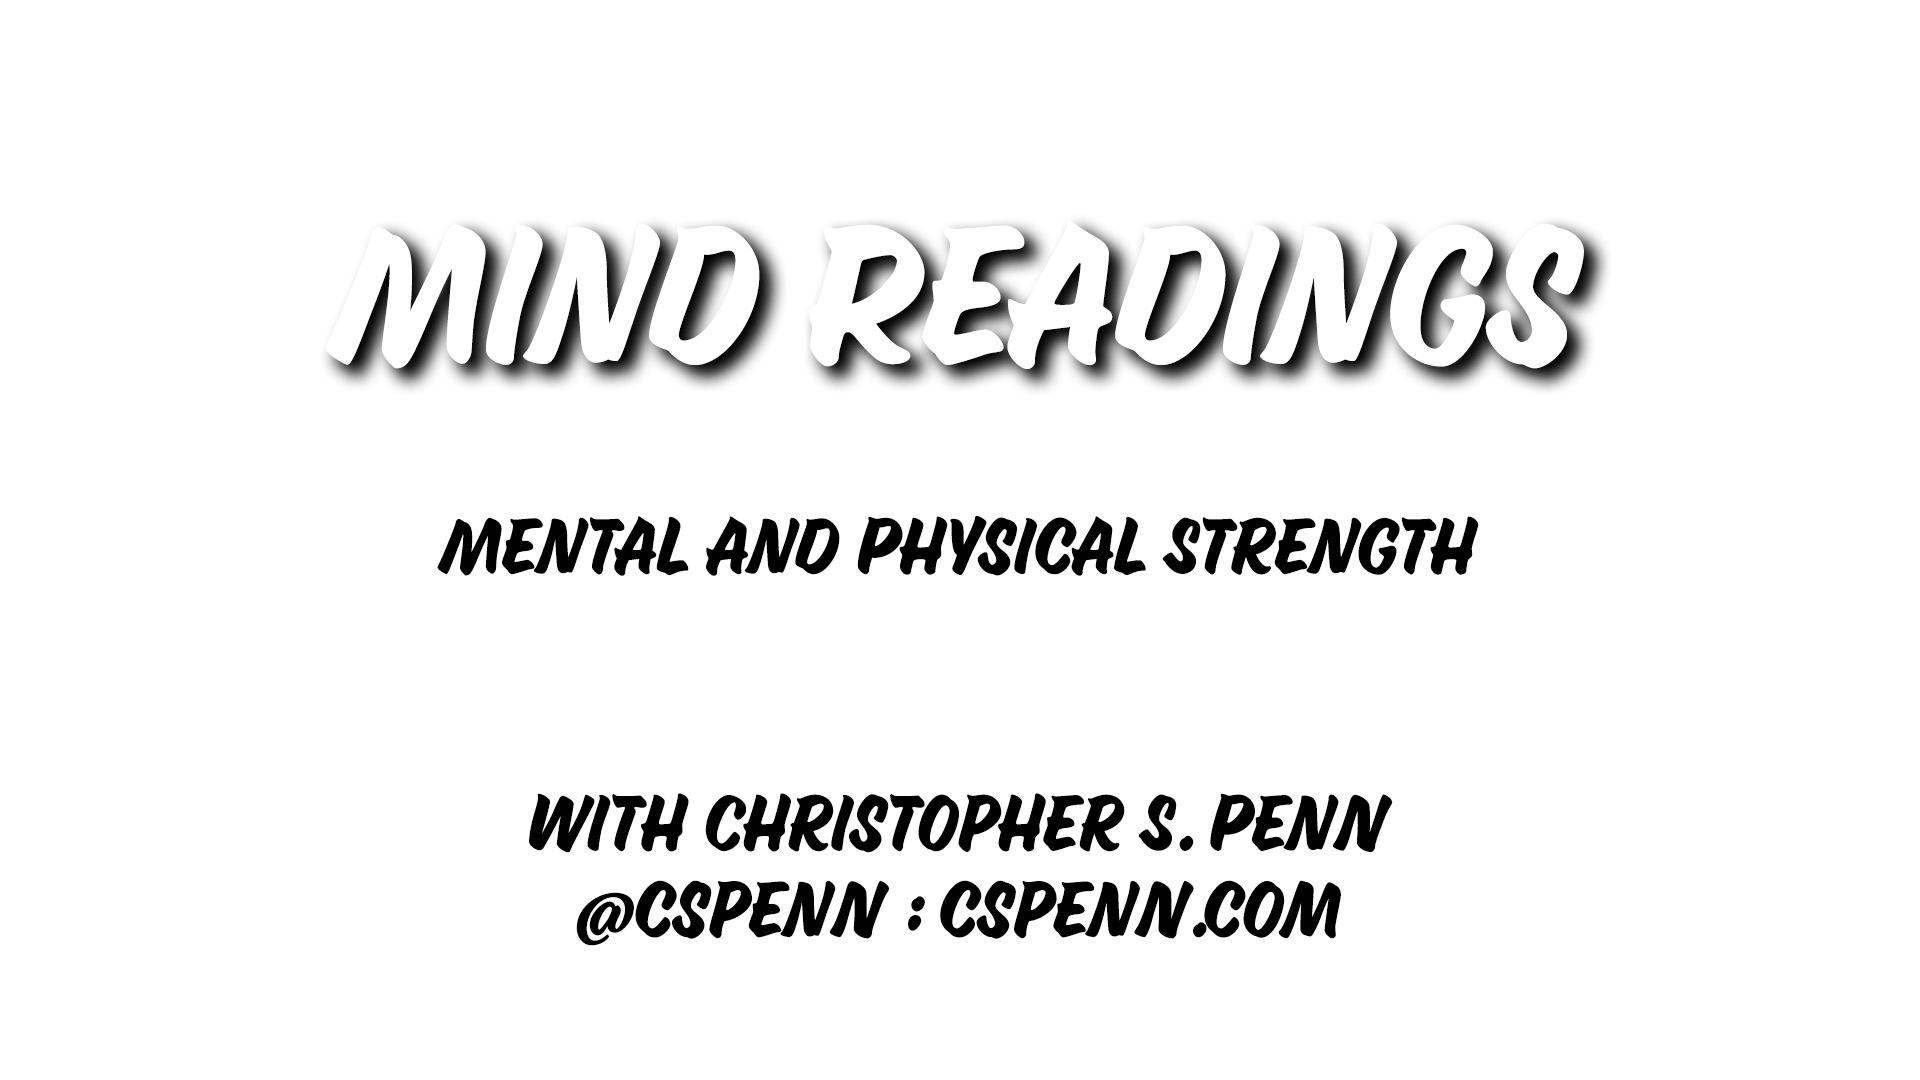 Mind Readings: Mental and Physical Strength